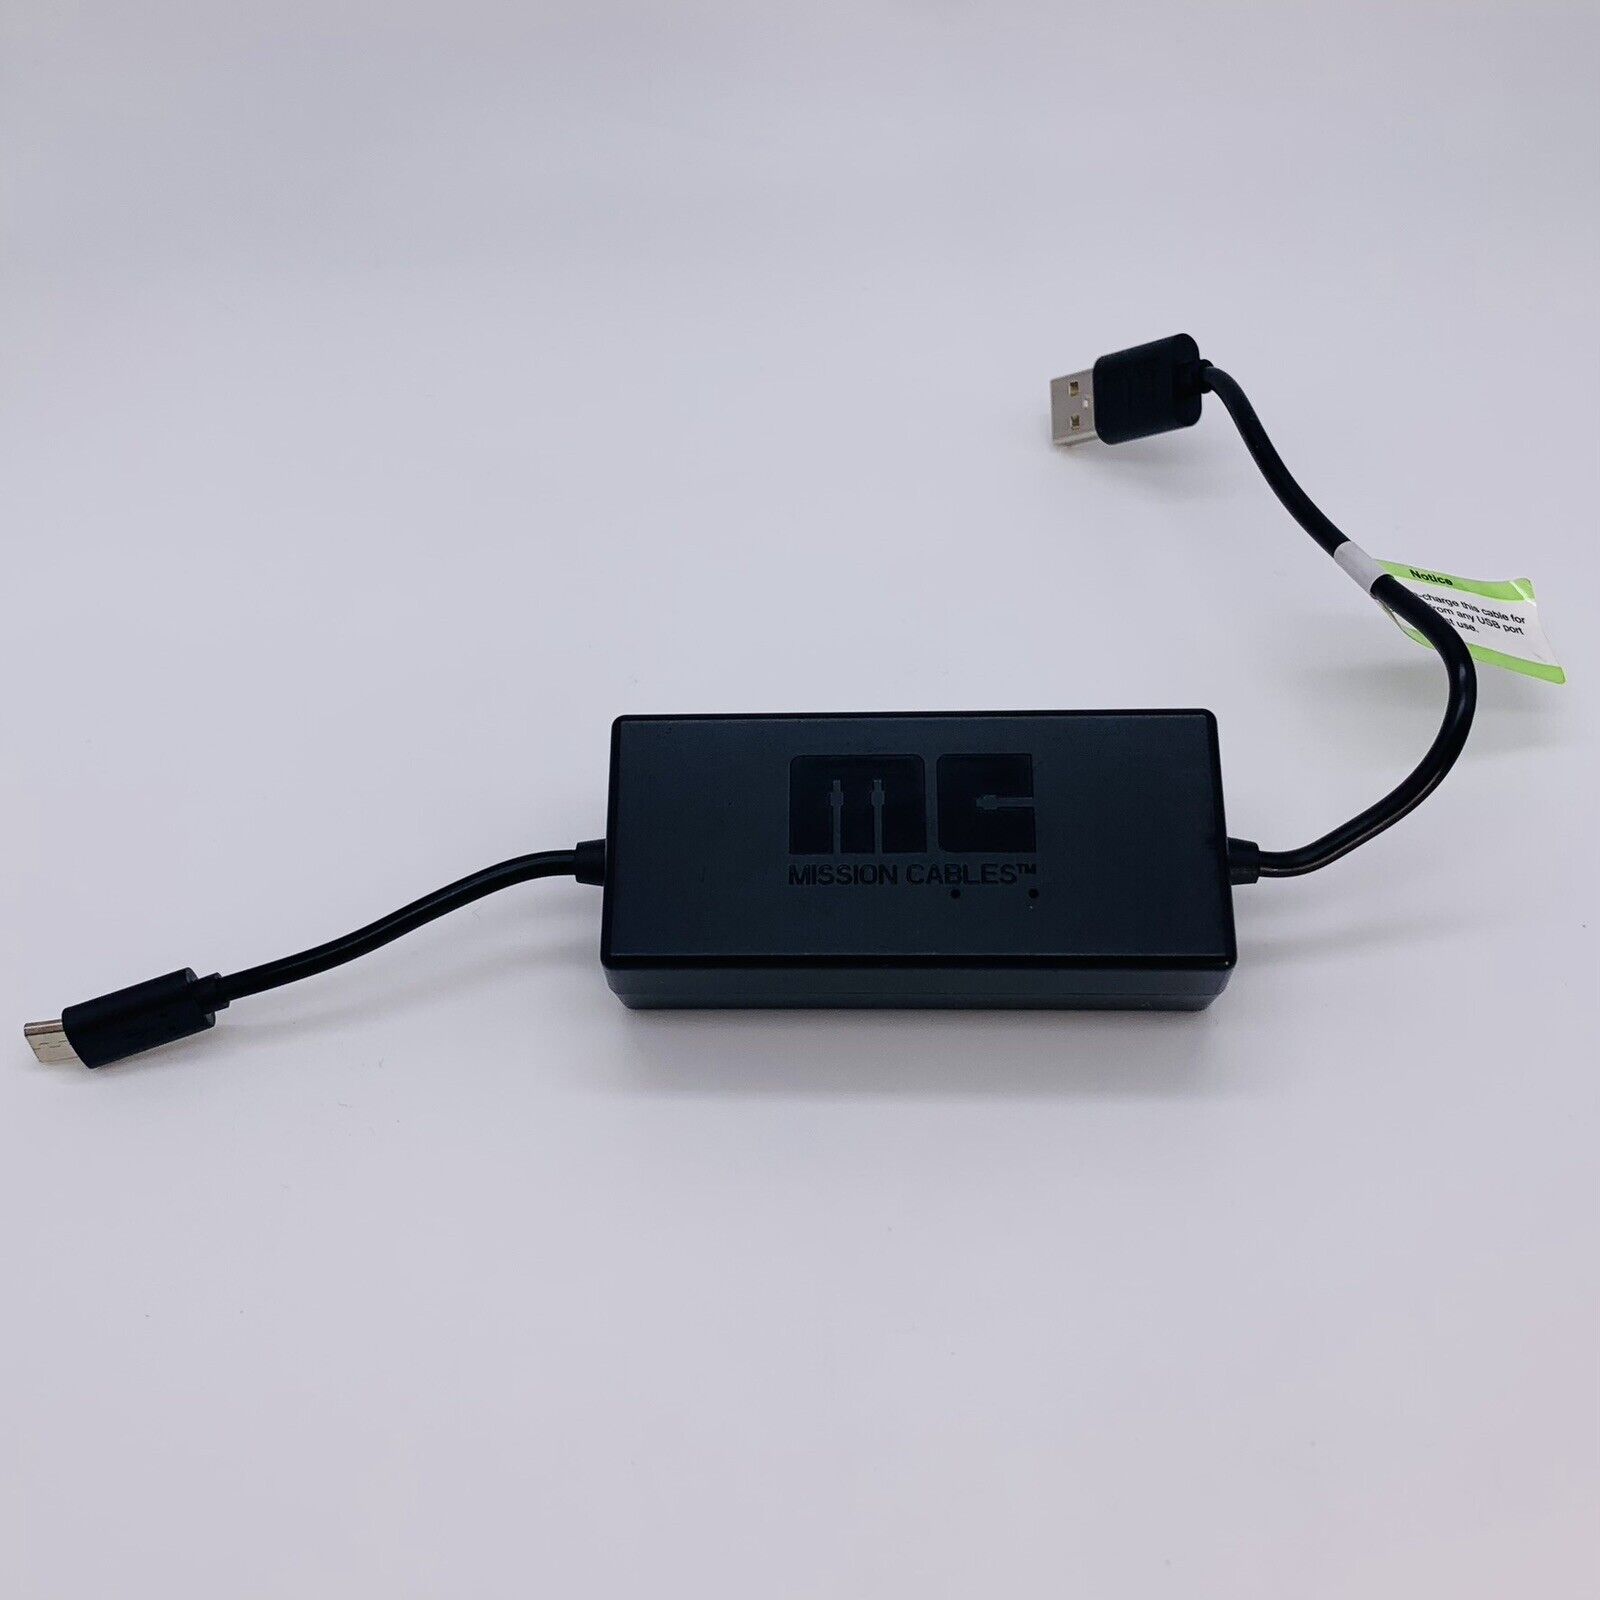 Mission Cables MC45 USB Power Cable for Amazon Fire TV No Retail Box - Open Box